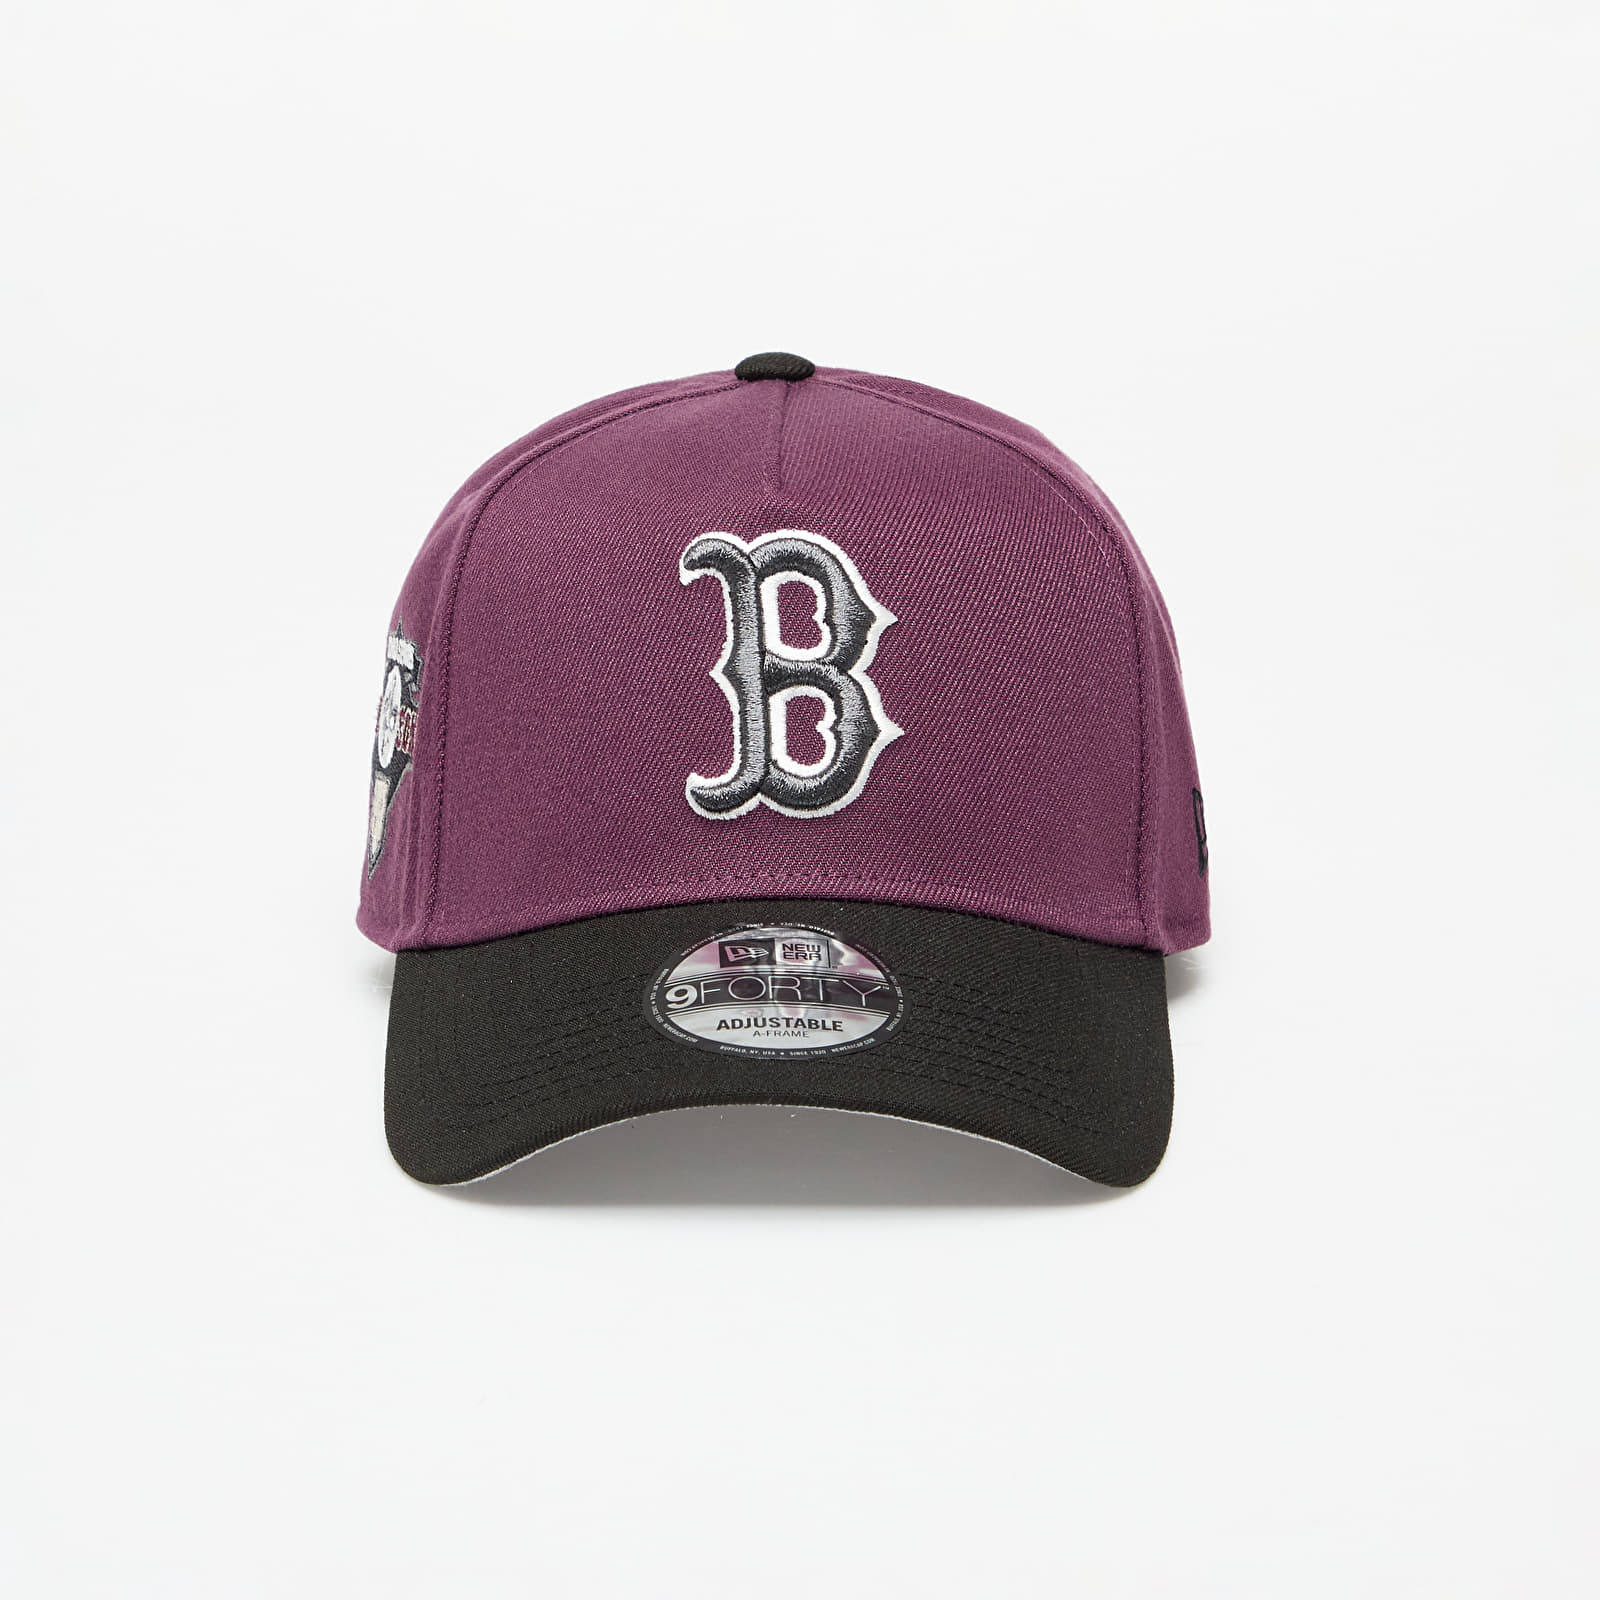 New Era - boston red sox two-tone a-frame 9forty adjustable cap dark purple